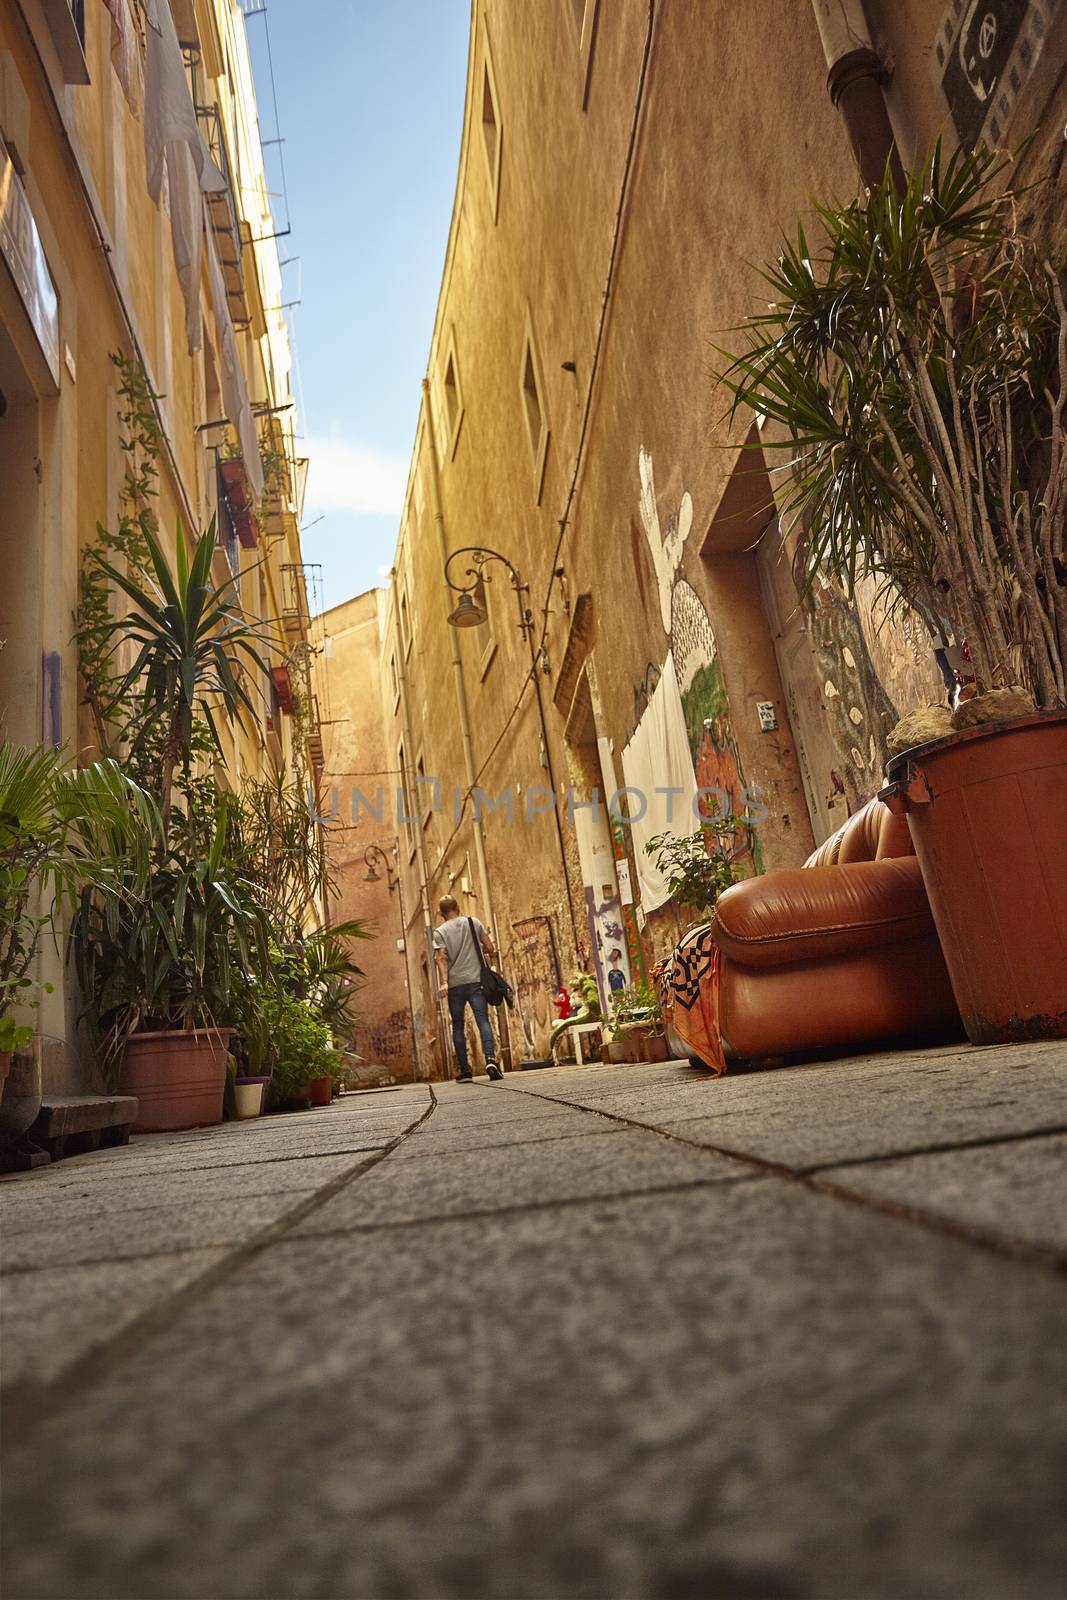 Shooting from the ground of a boy with shoulders walking along a colorful and characteristic alley of the city of Cagliari.